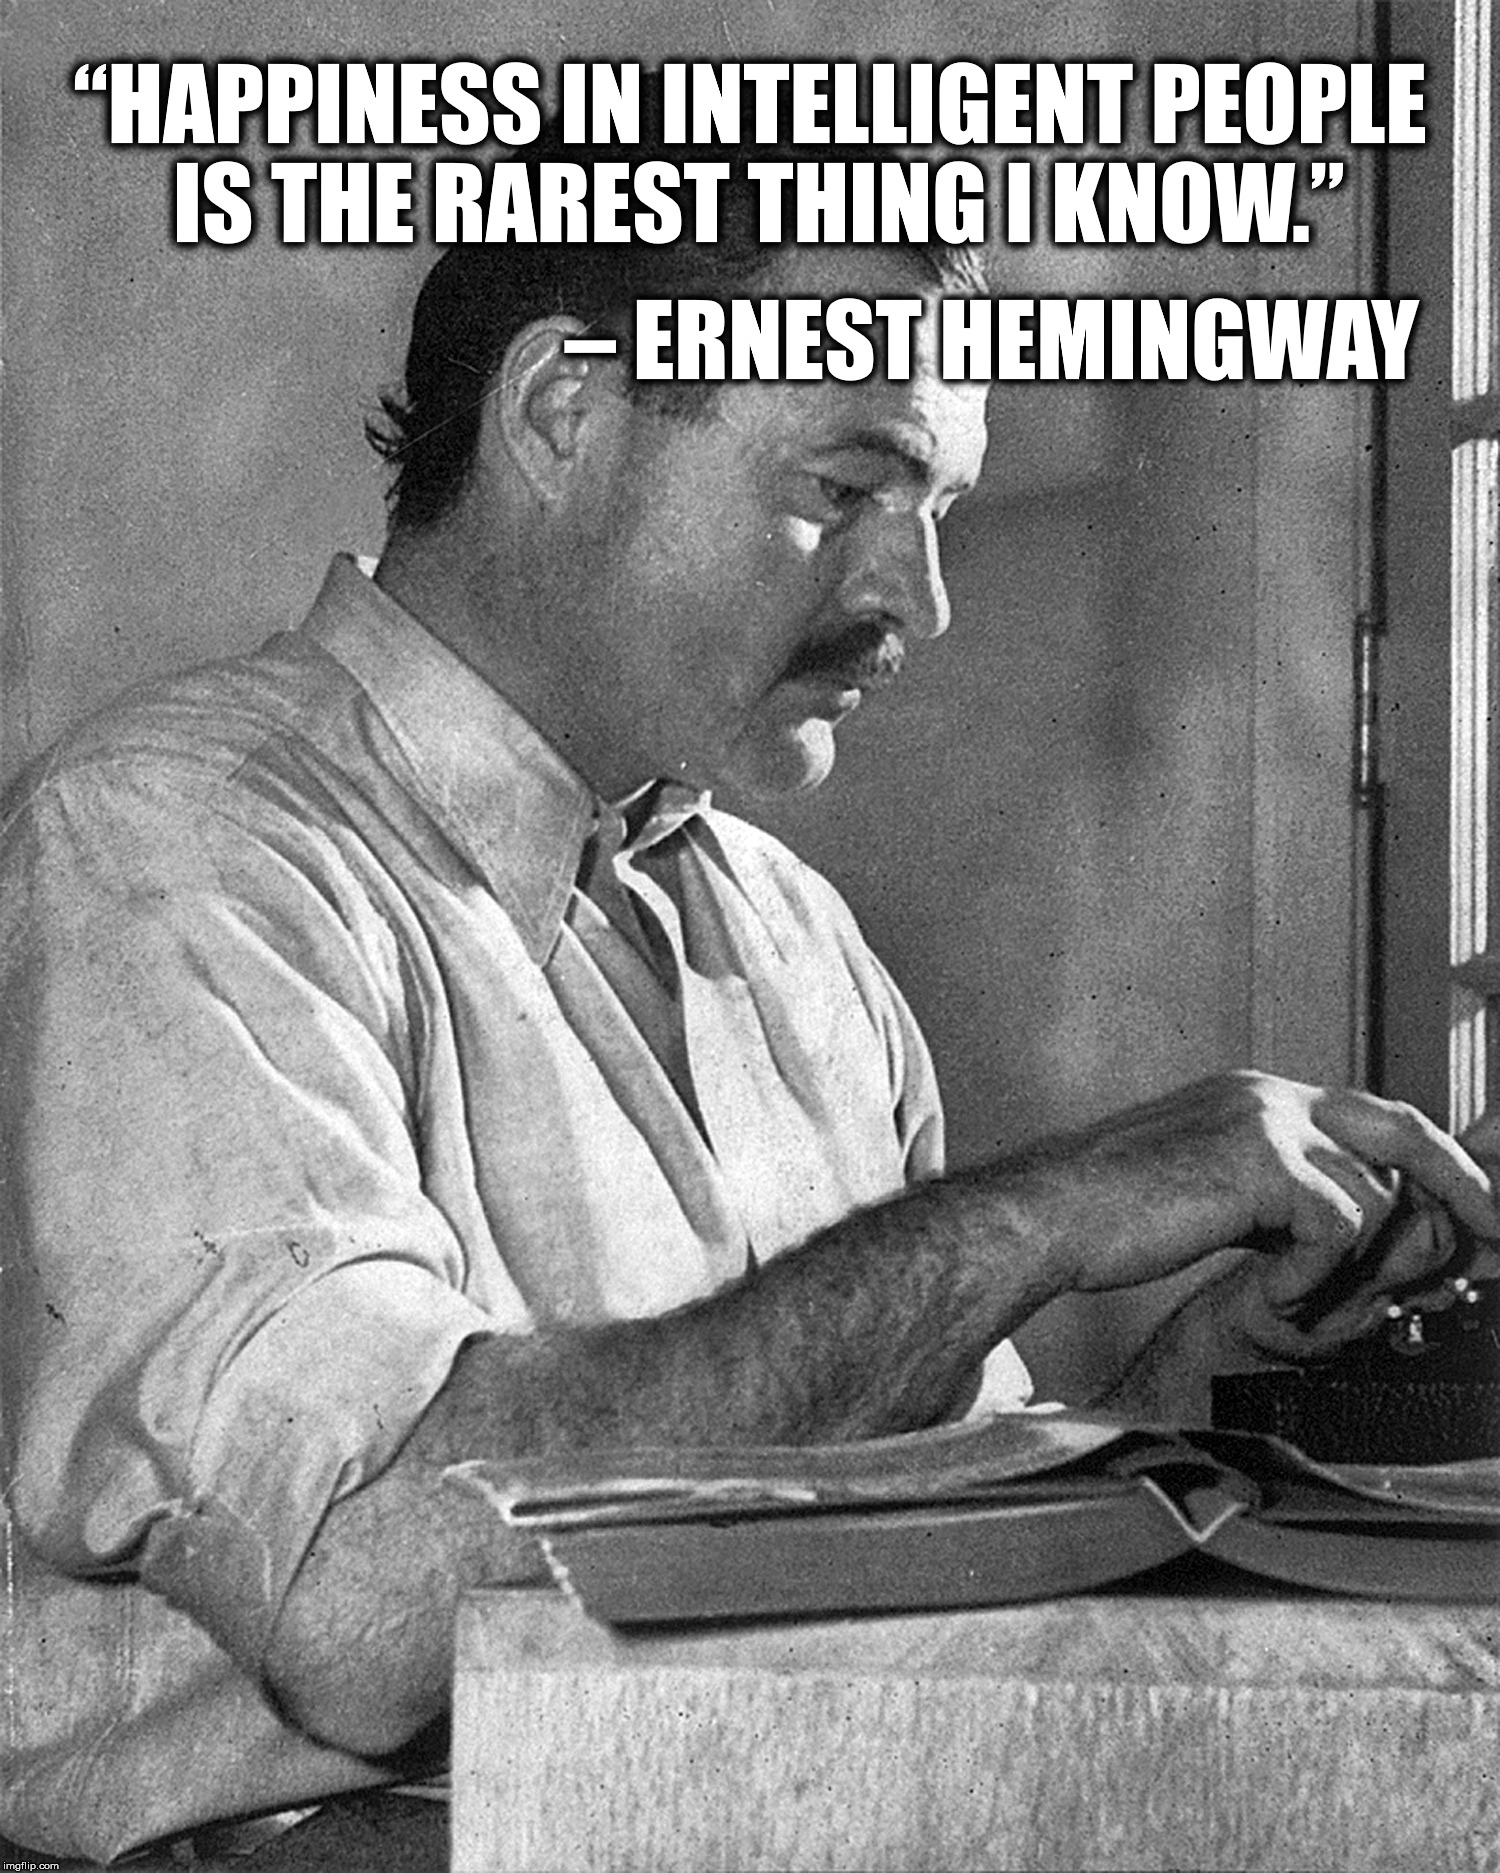 Ernest Hemingway quote | “HAPPINESS IN INTELLIGENT PEOPLE IS THE RAREST THING I KNOW.”; – ERNEST HEMINGWAY | image tagged in ernest hemingway,happiness,intelligent,rarest,hemingway | made w/ Imgflip meme maker